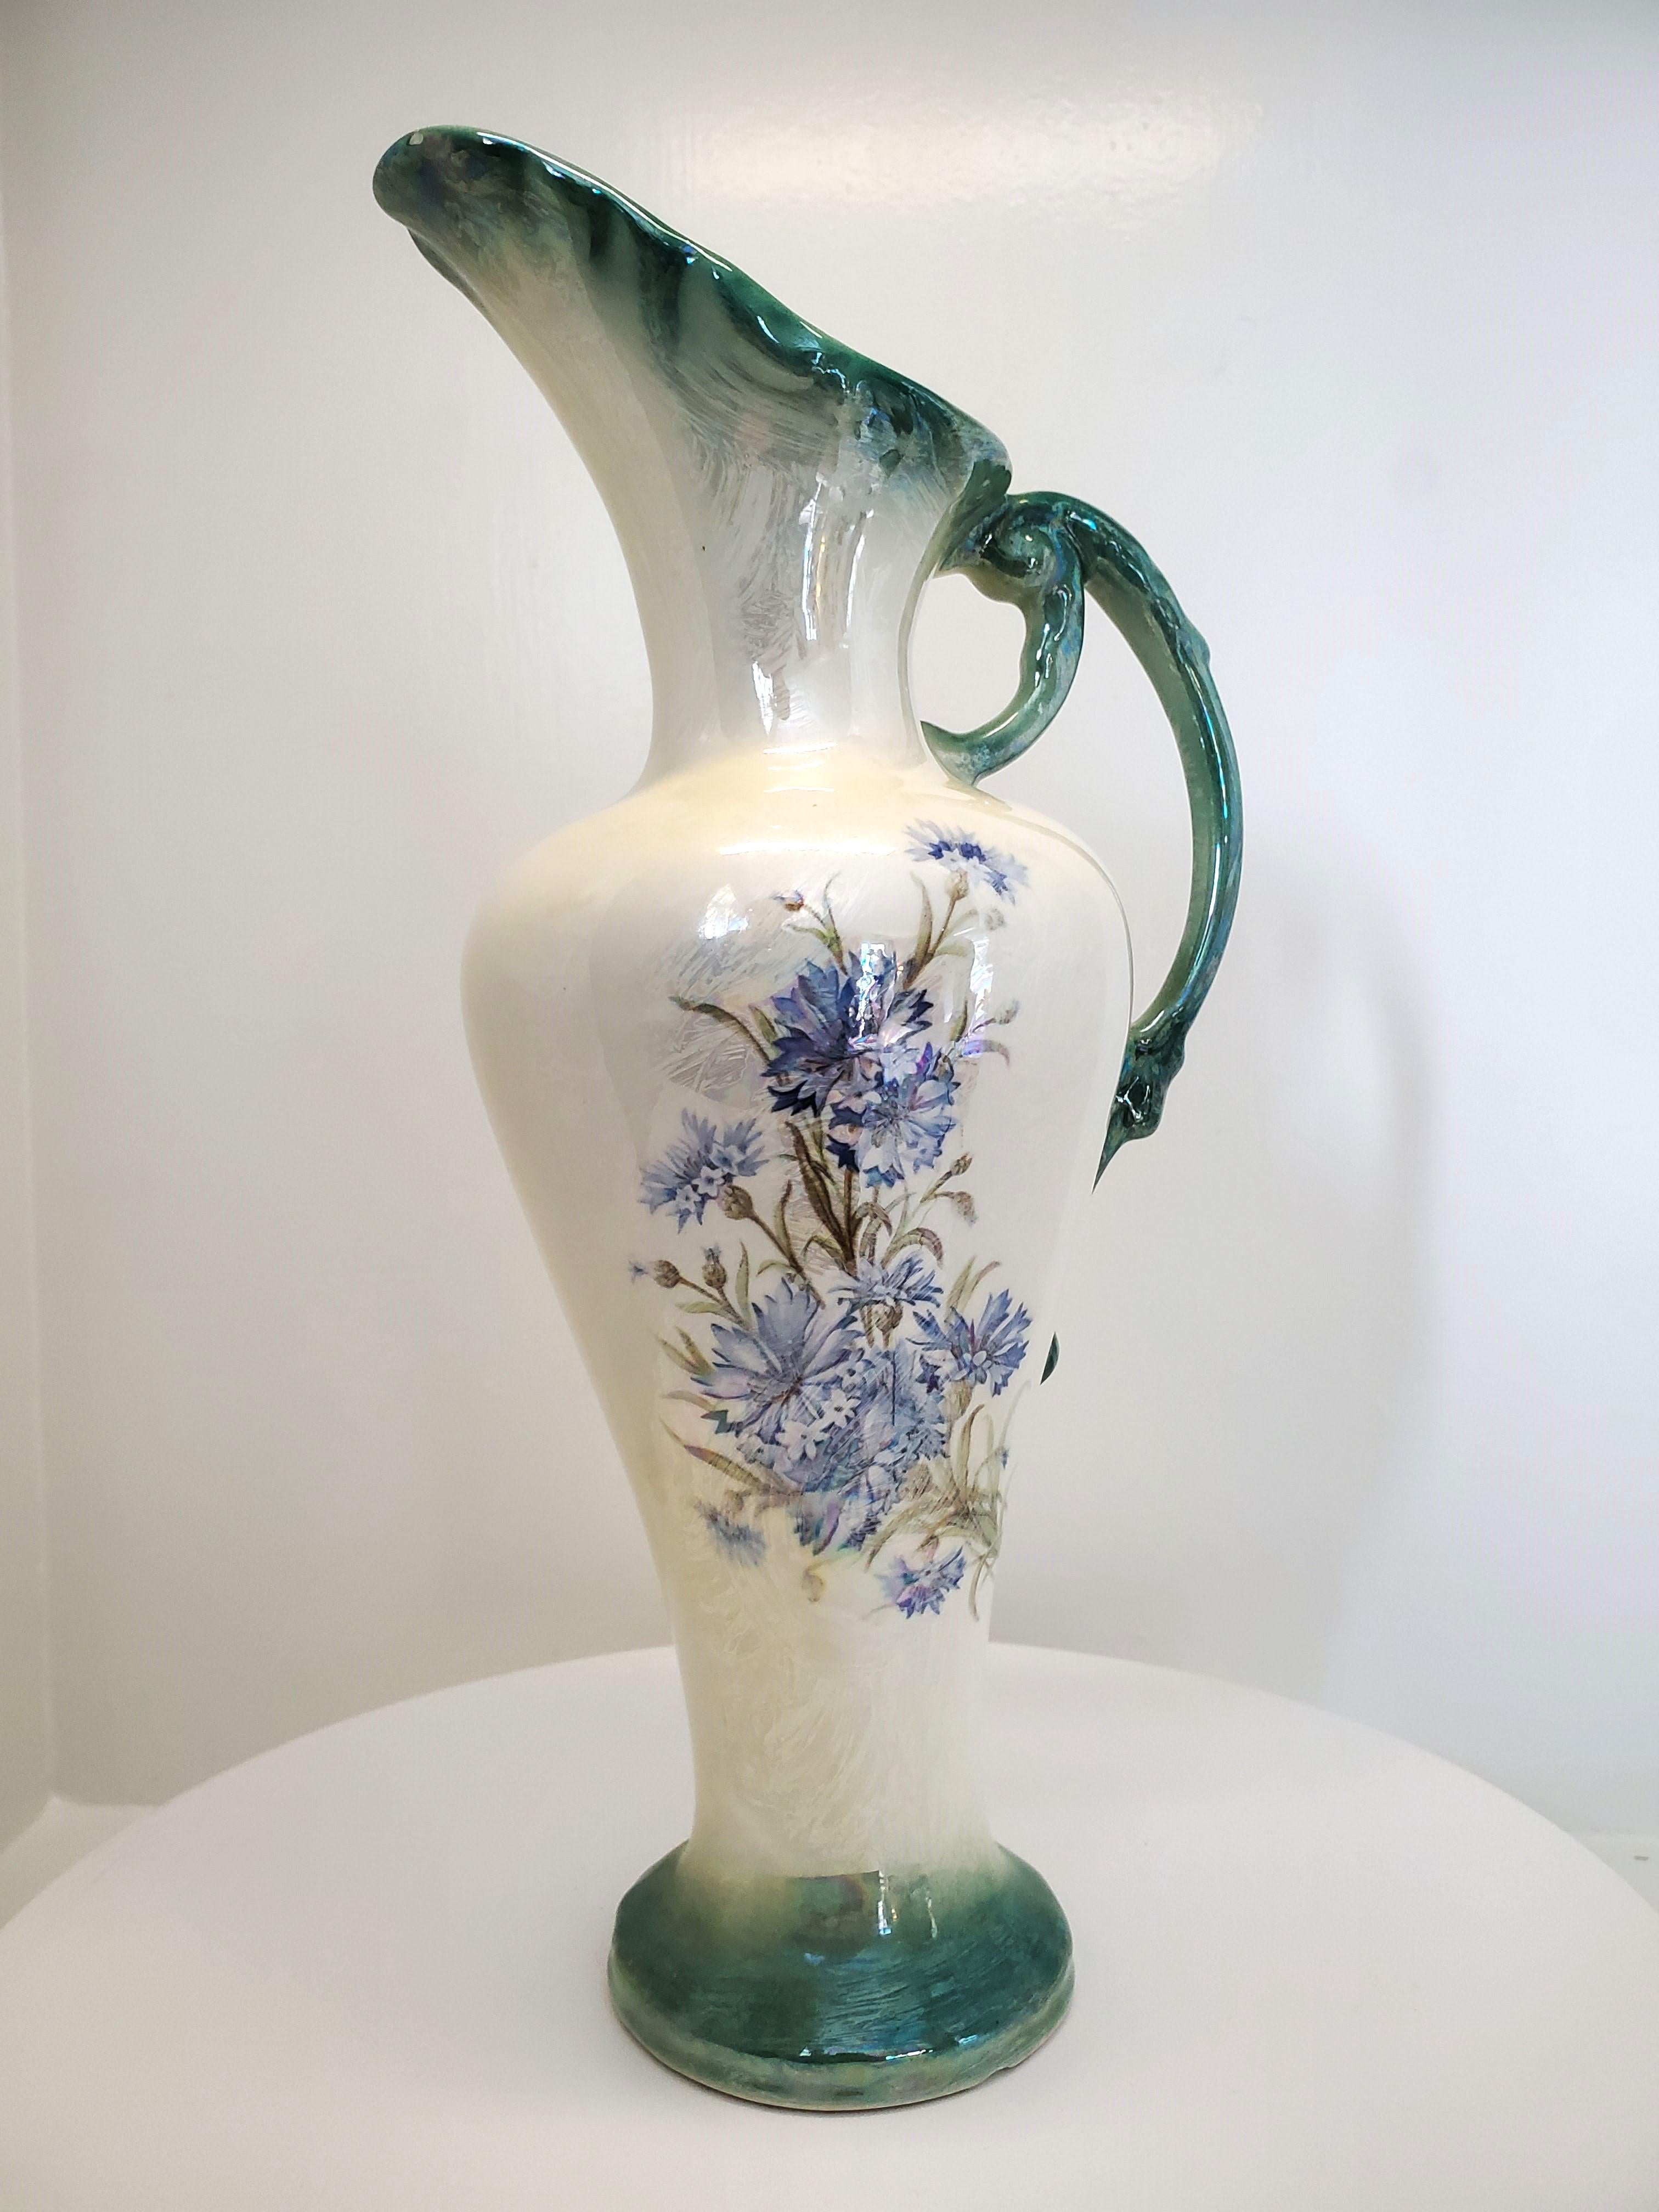 Glazed Victorian Pearl Lusterware Ewer or Pitcher with Green Trim and Blue Flowers For Sale